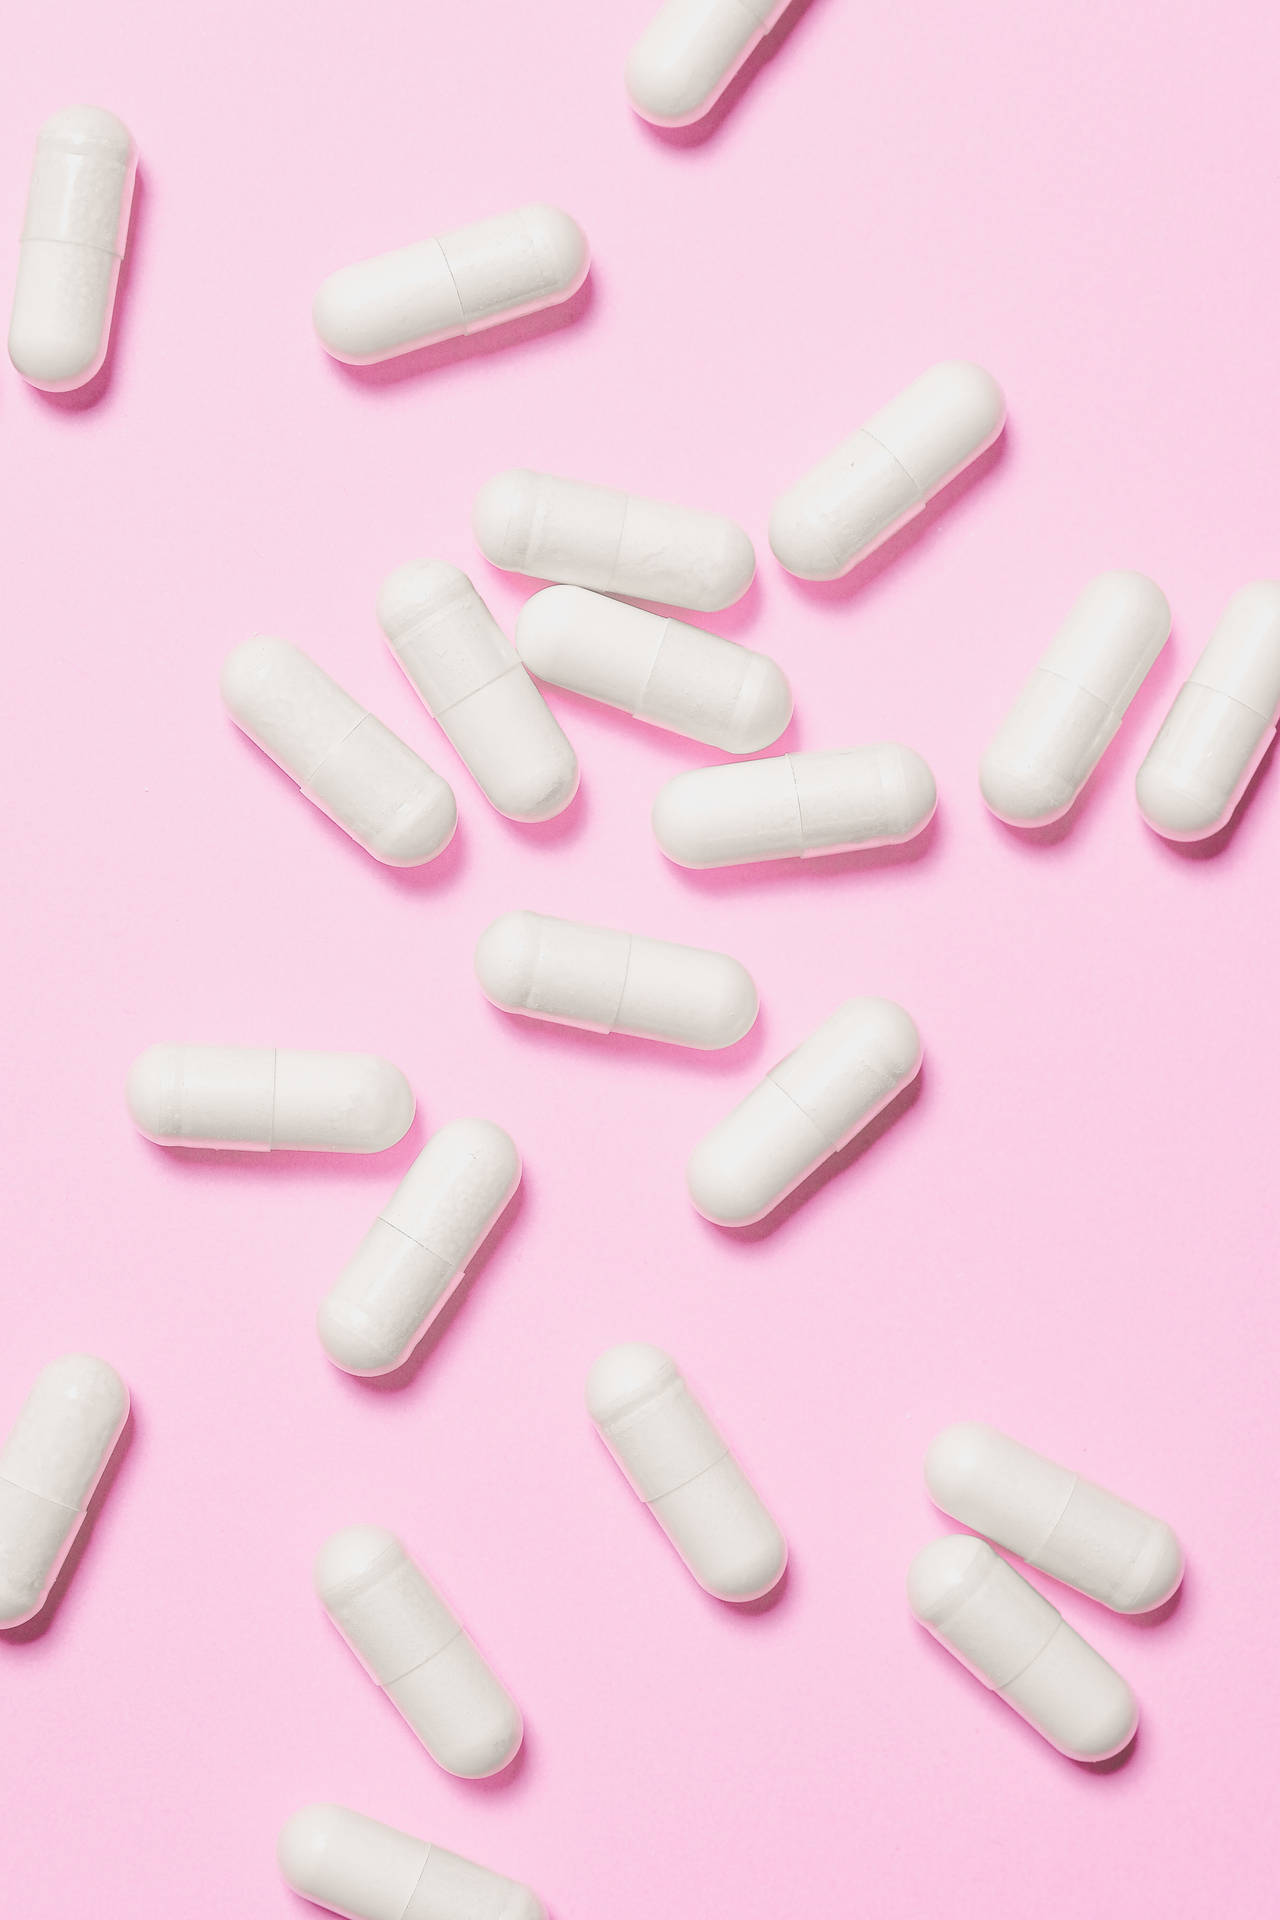 White Capsules On Pink Background Background